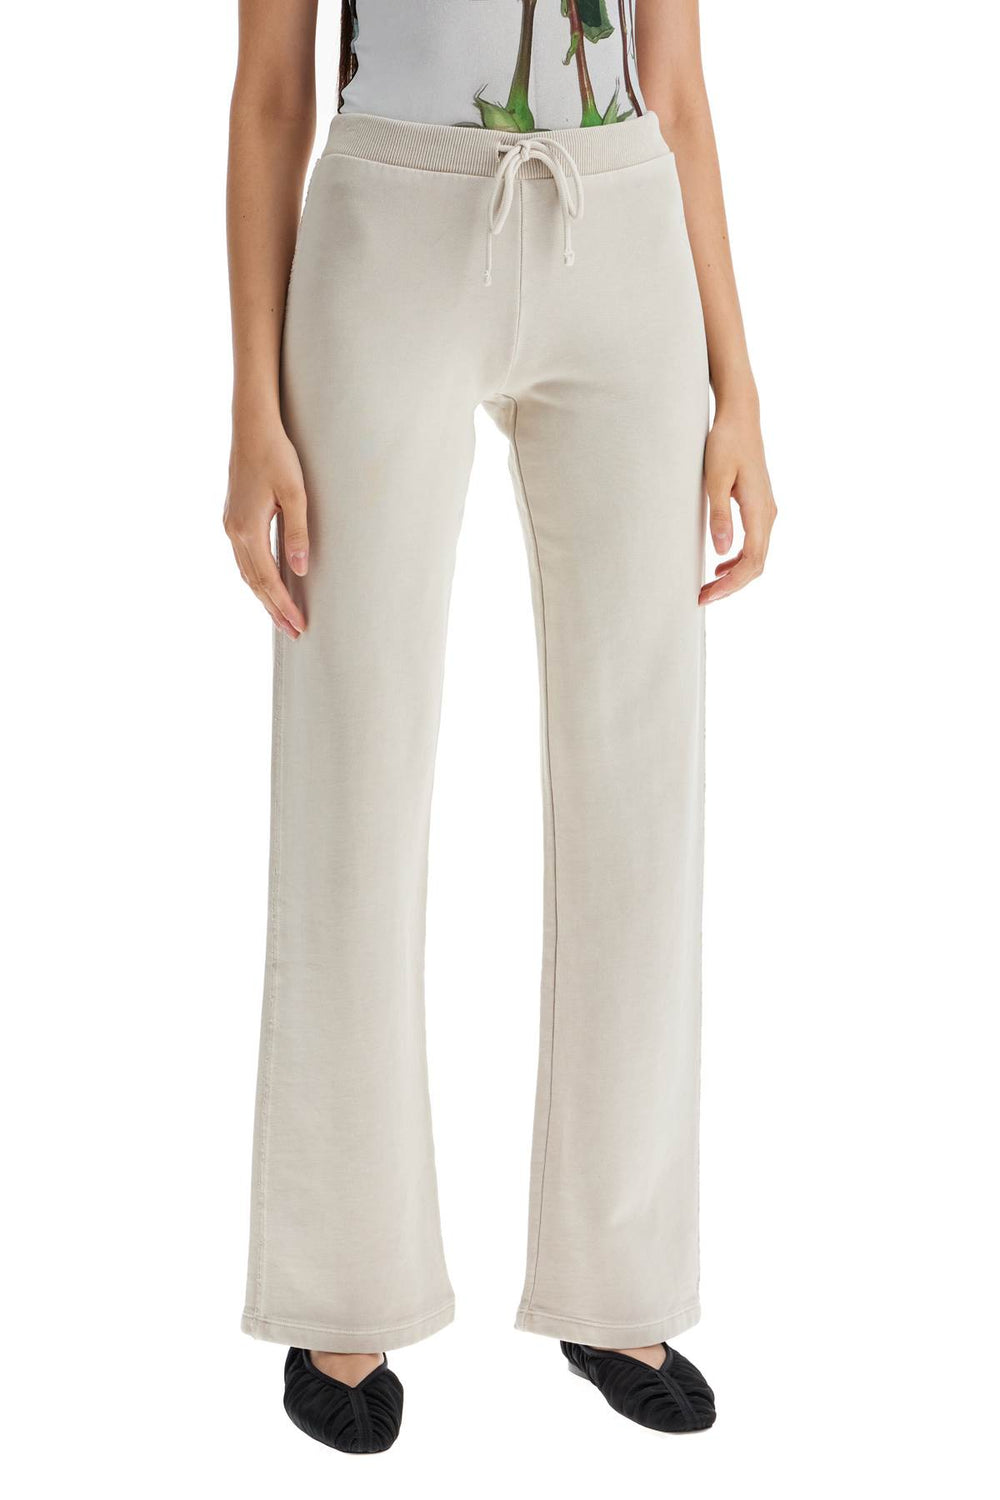 low-waisted miller sports pants with-1